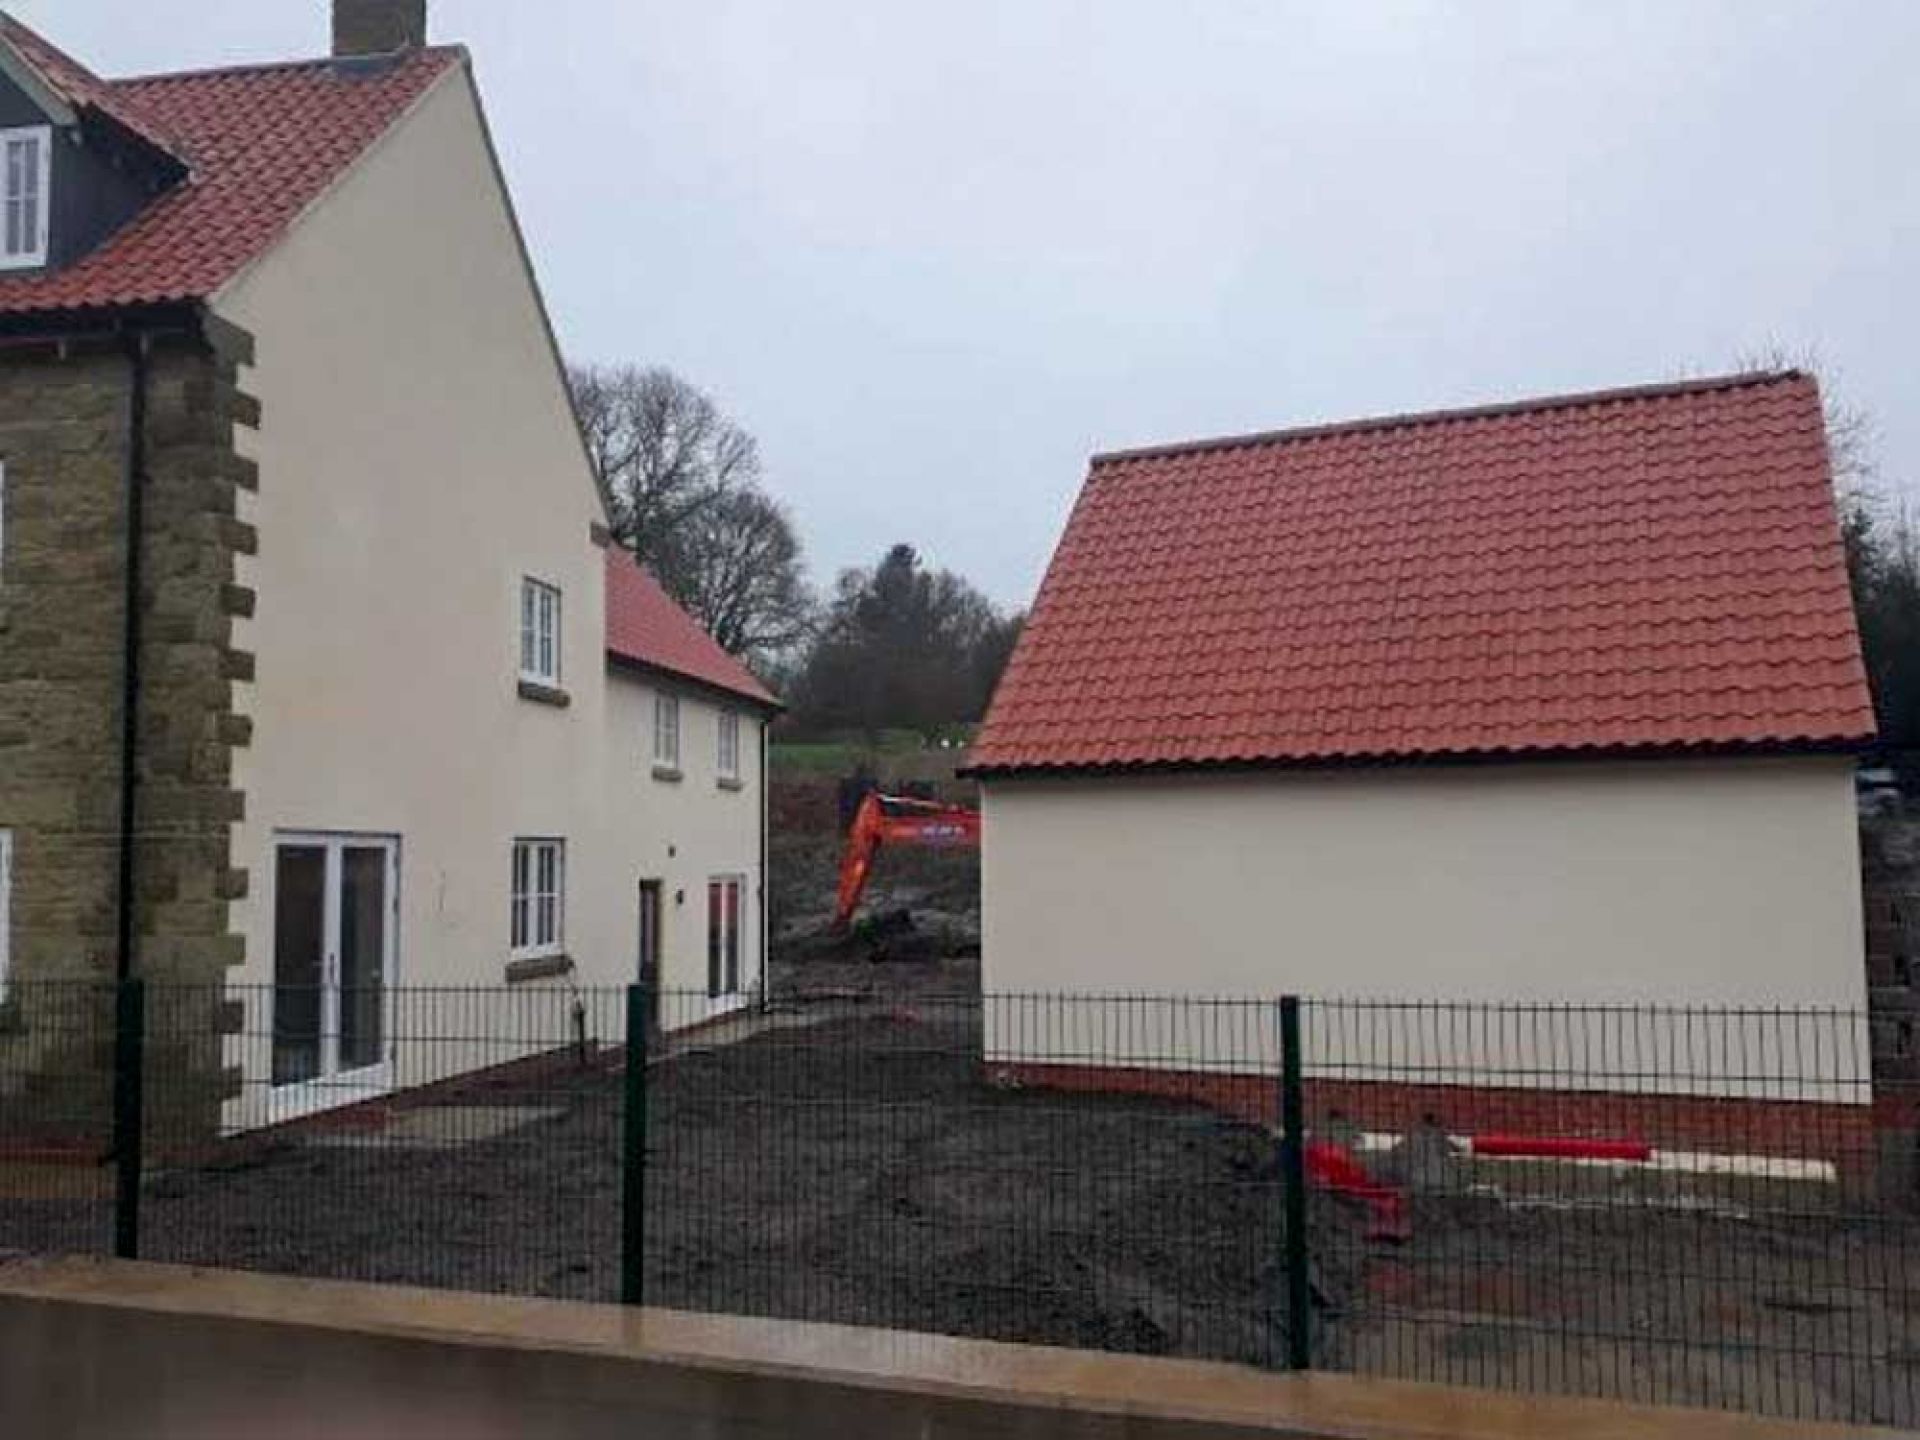 Rear view of some new houses as part of a development.